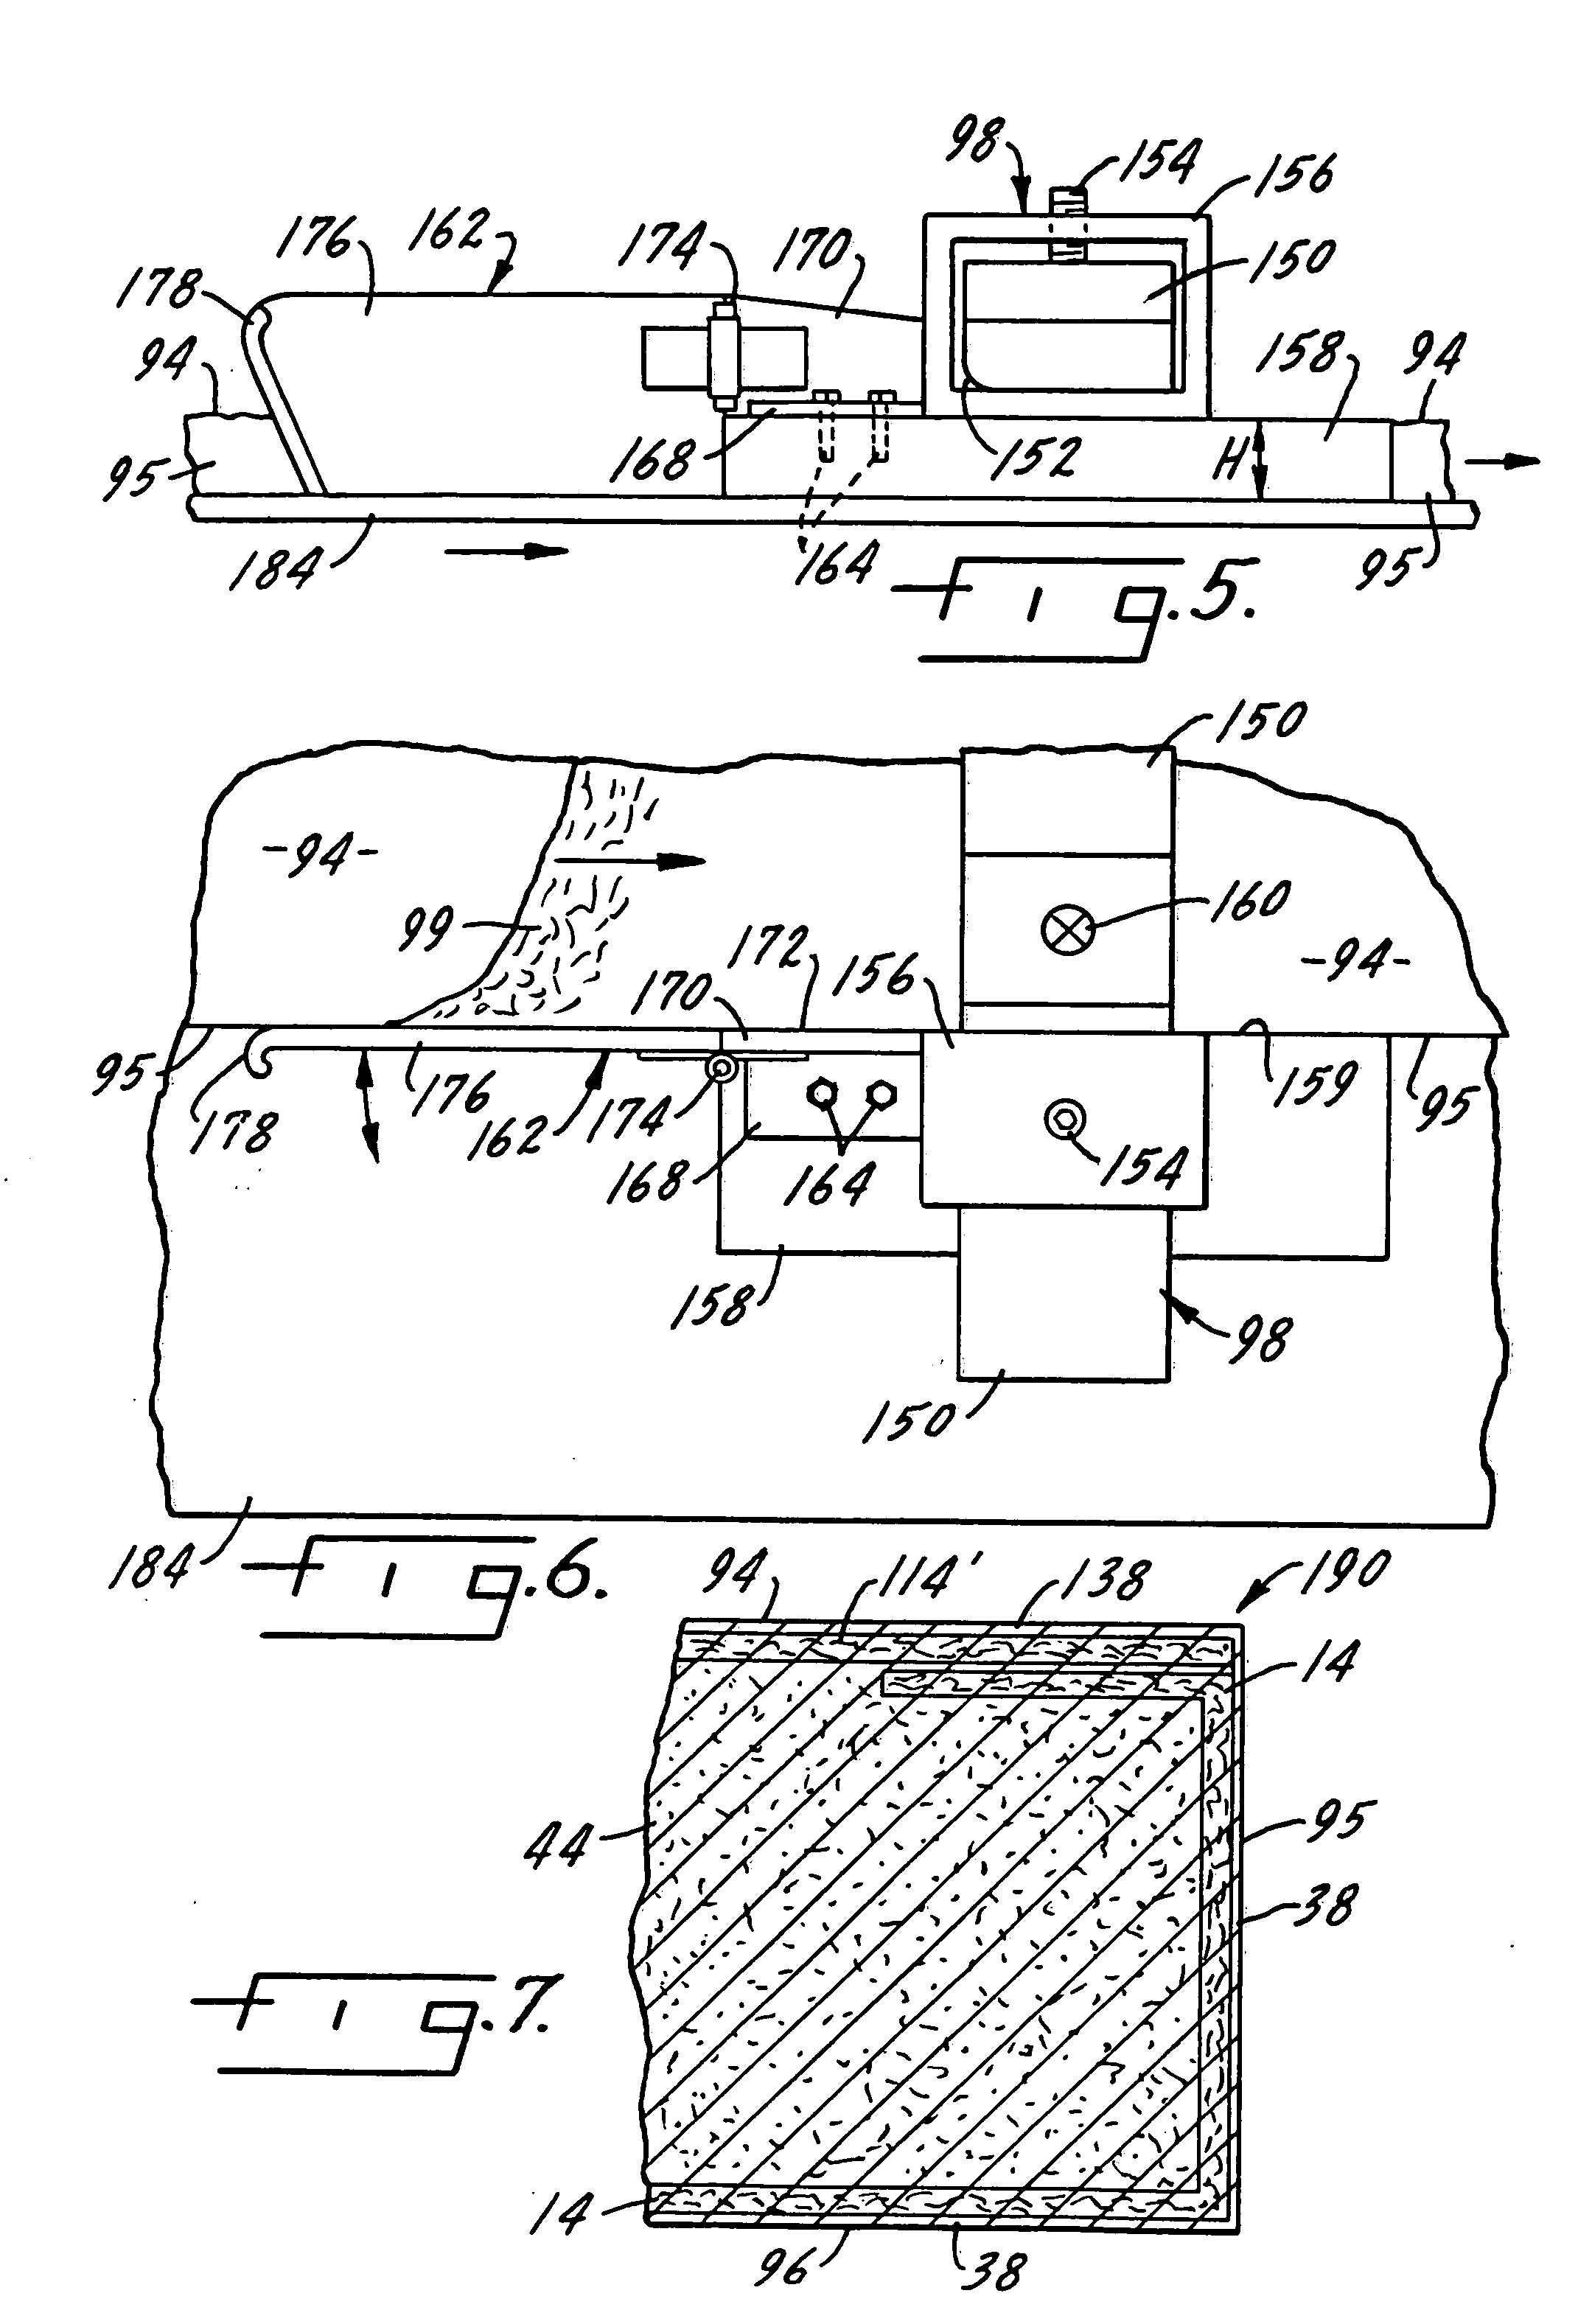 Exterior sheathing weather barrier construction and method of manufacture